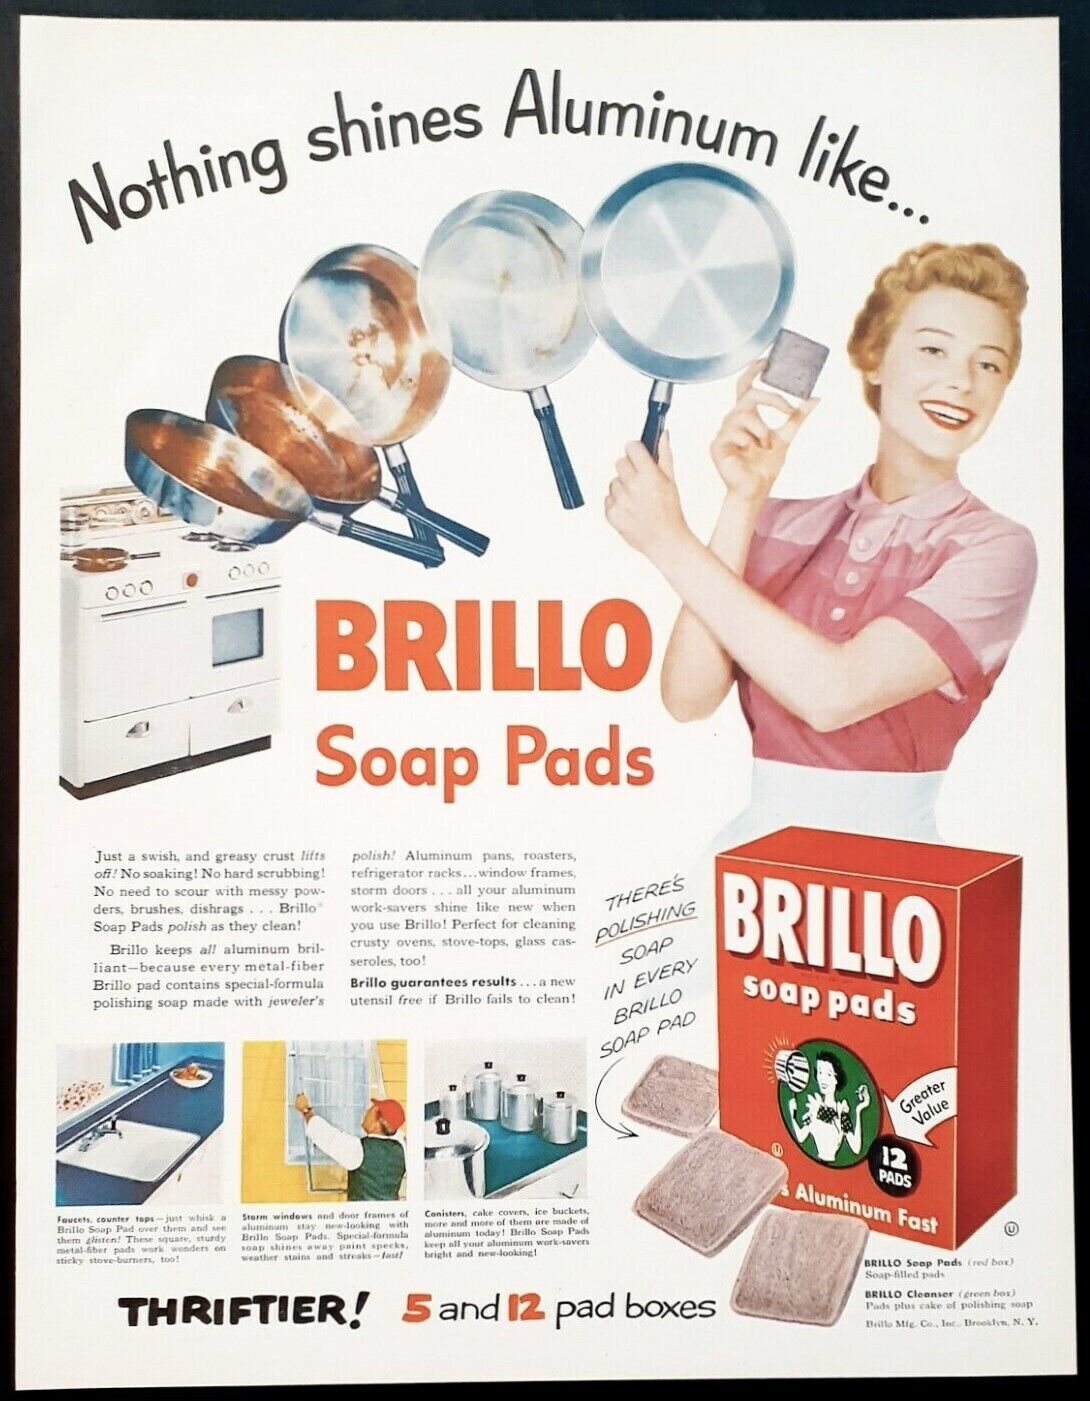 Brillo soap pads ad vintage 1955 housewife original advertisement